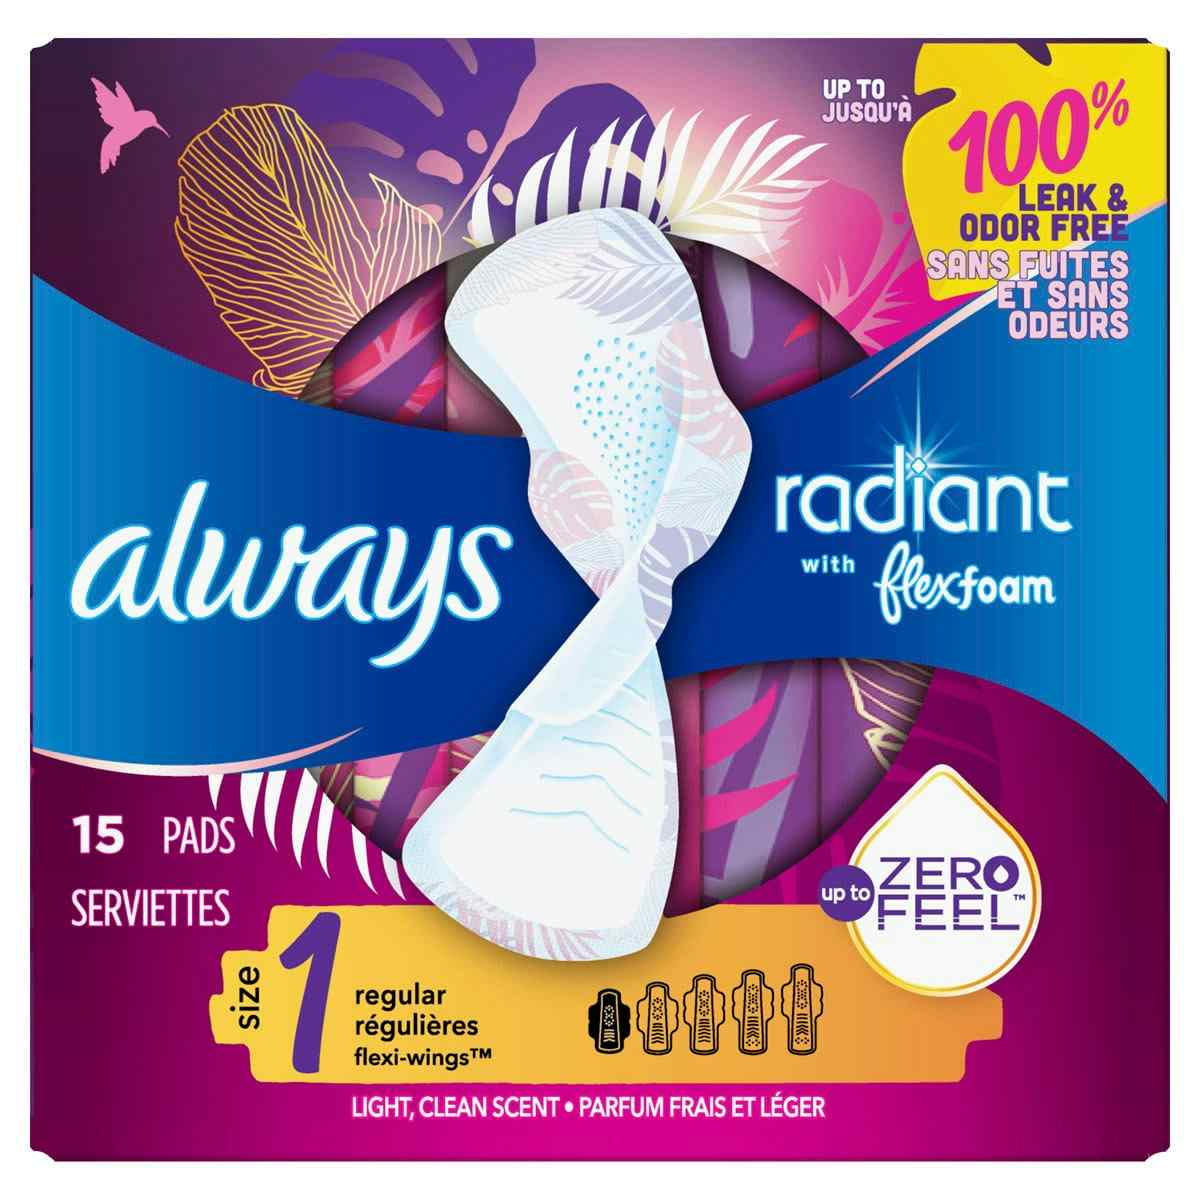 Always Radiant Pads, Size 1, Light Clean Scent, Regular Absorbency, 80348176, Pack of 30